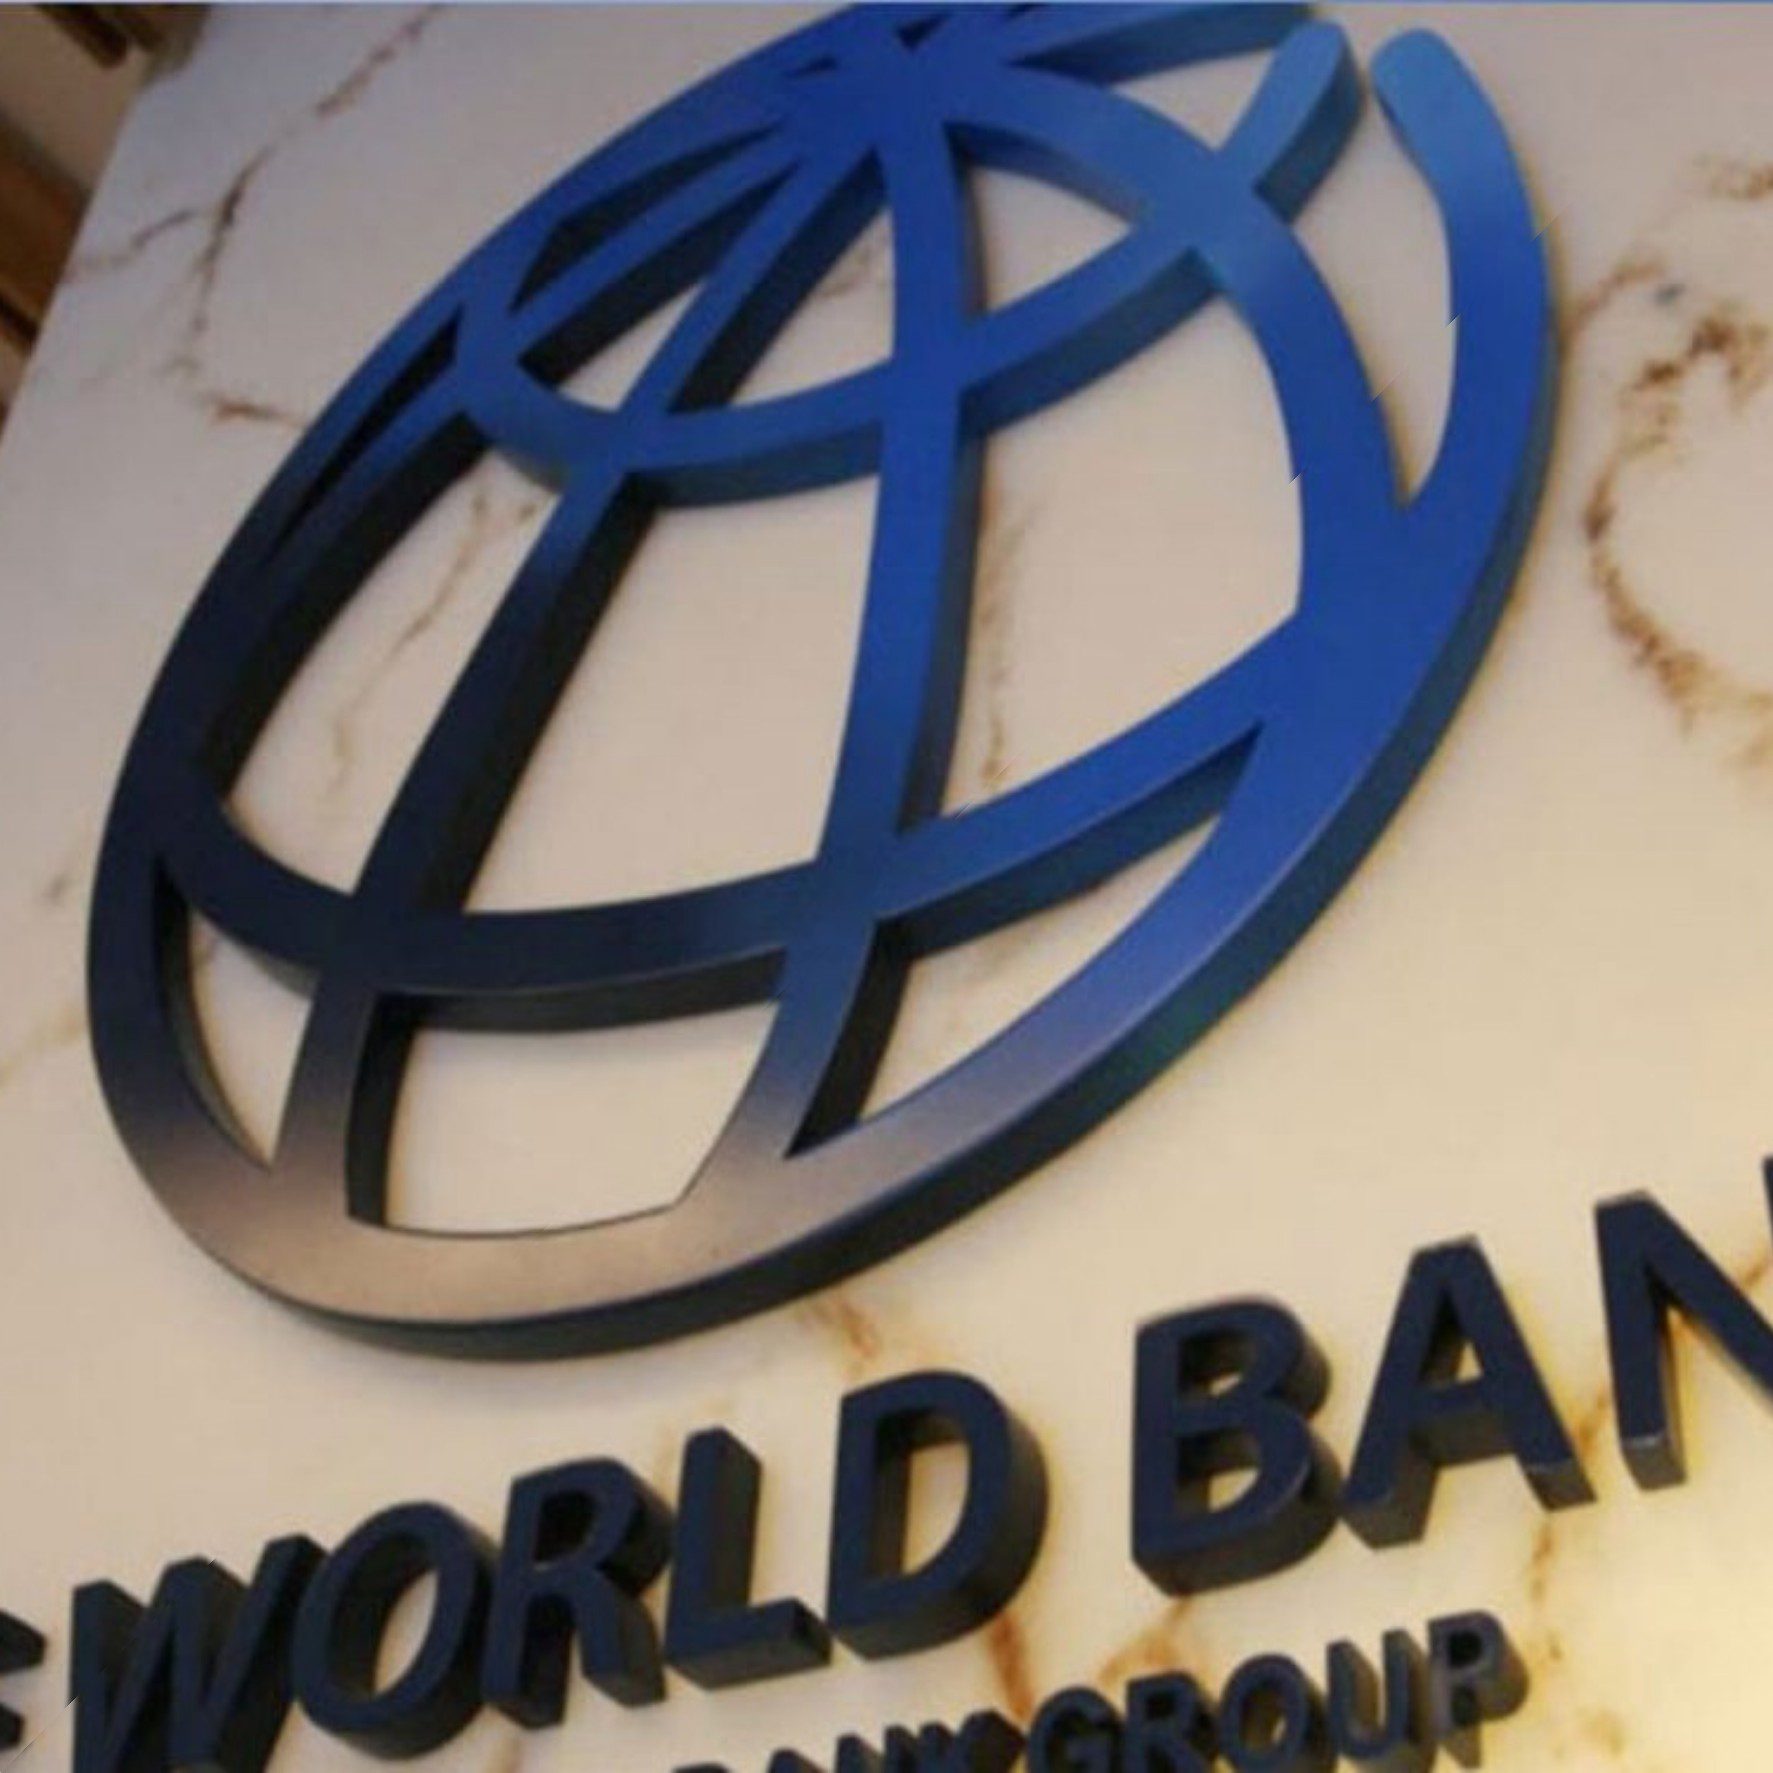 World bank approves $700 million for water sanitation hygiene in Nigeria